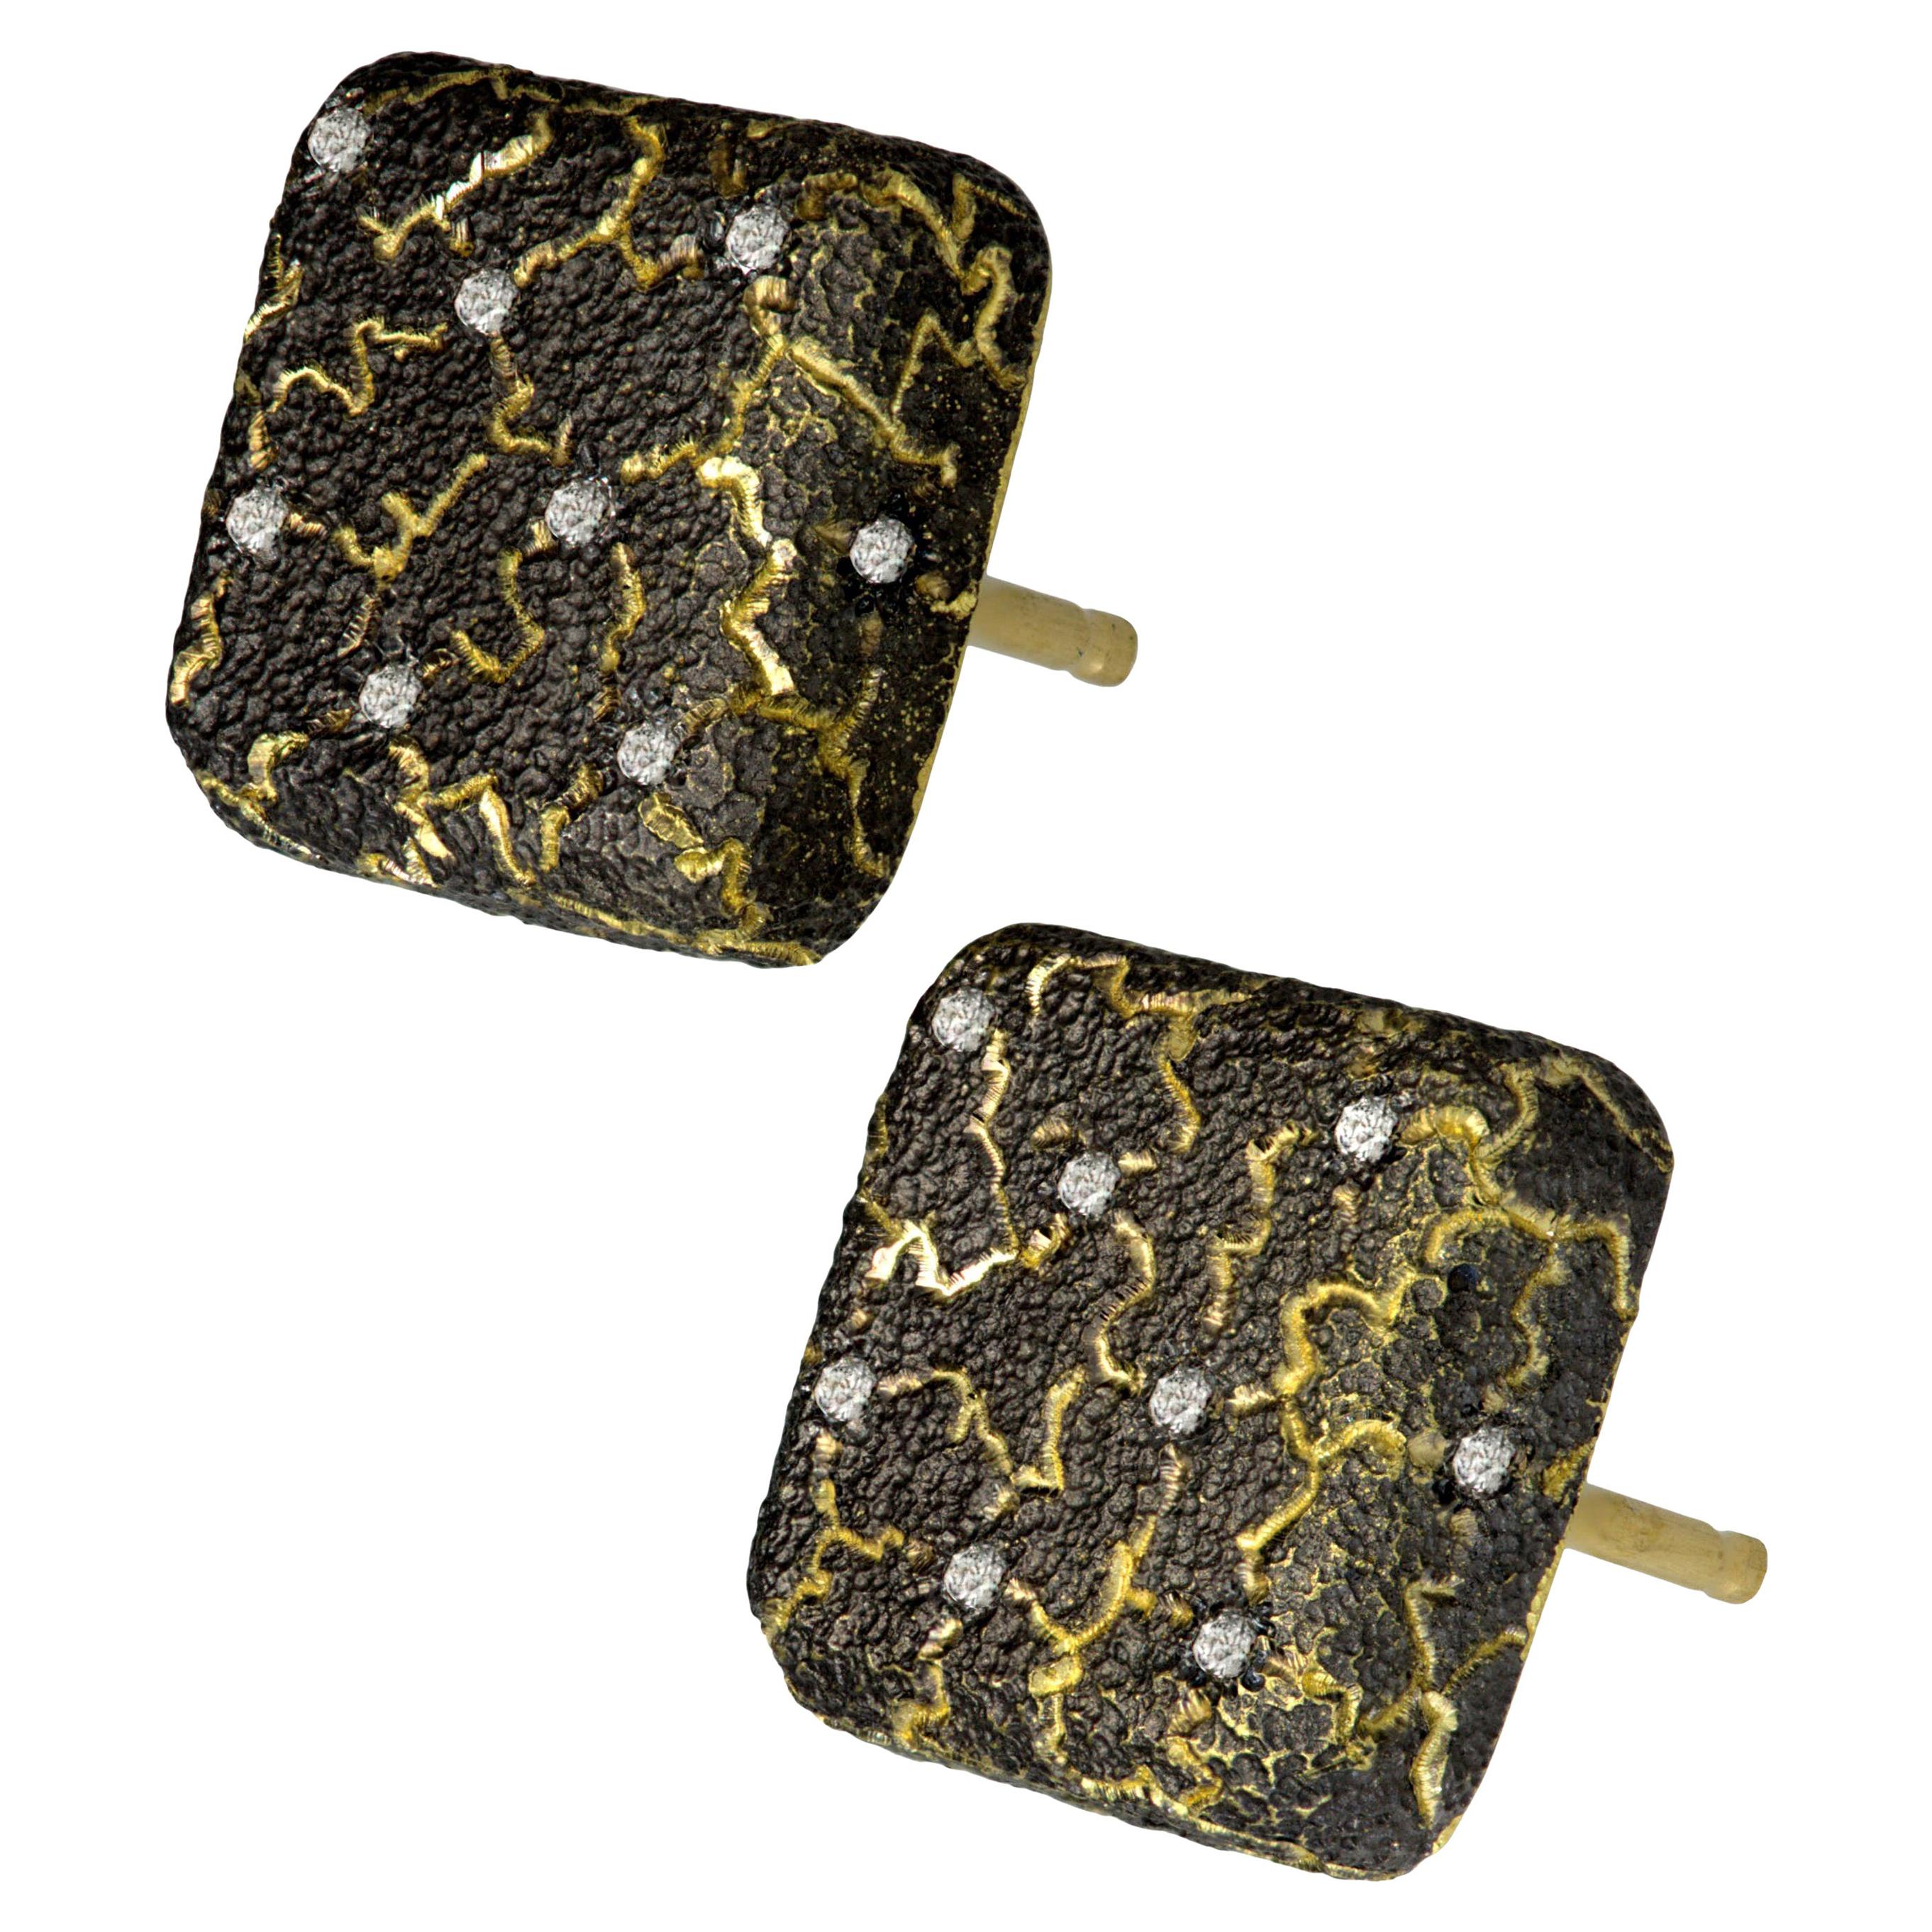 Alex Soldier Diamond Lava stud earrings: made in 18 karat yellow gold with diamonds (0.12 ct) and signature metalwork that creates an illusion of inner shimmer. Handmade in NYC. Complimentary conversion to cufflinks is available within 2 business